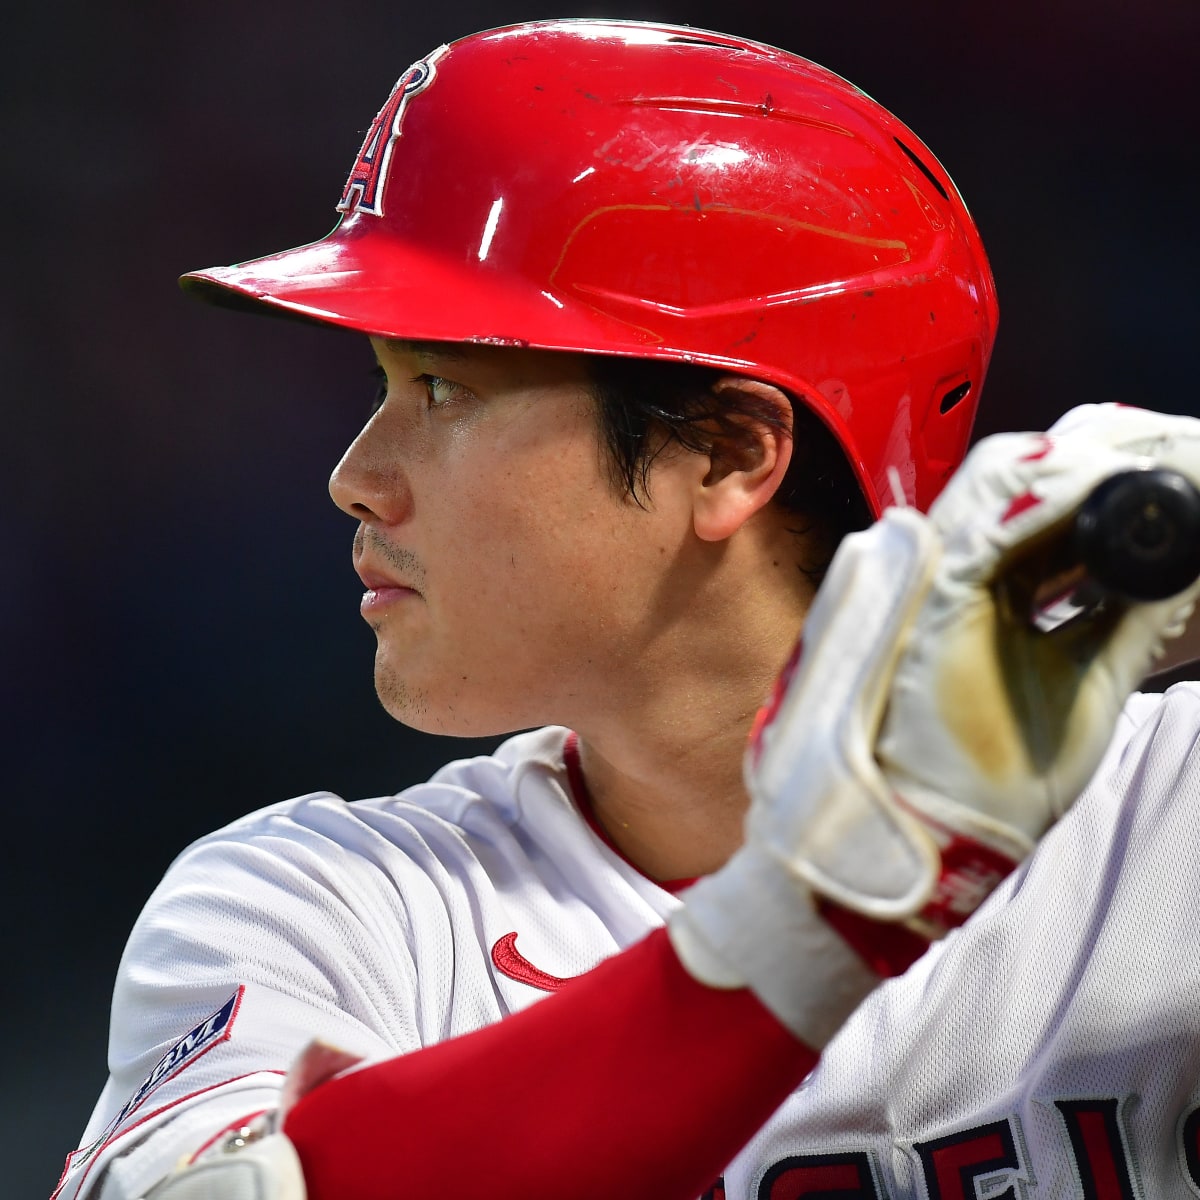 Shohei Ohtani may not be the “Ace” the Twins really want - Twinkie Town